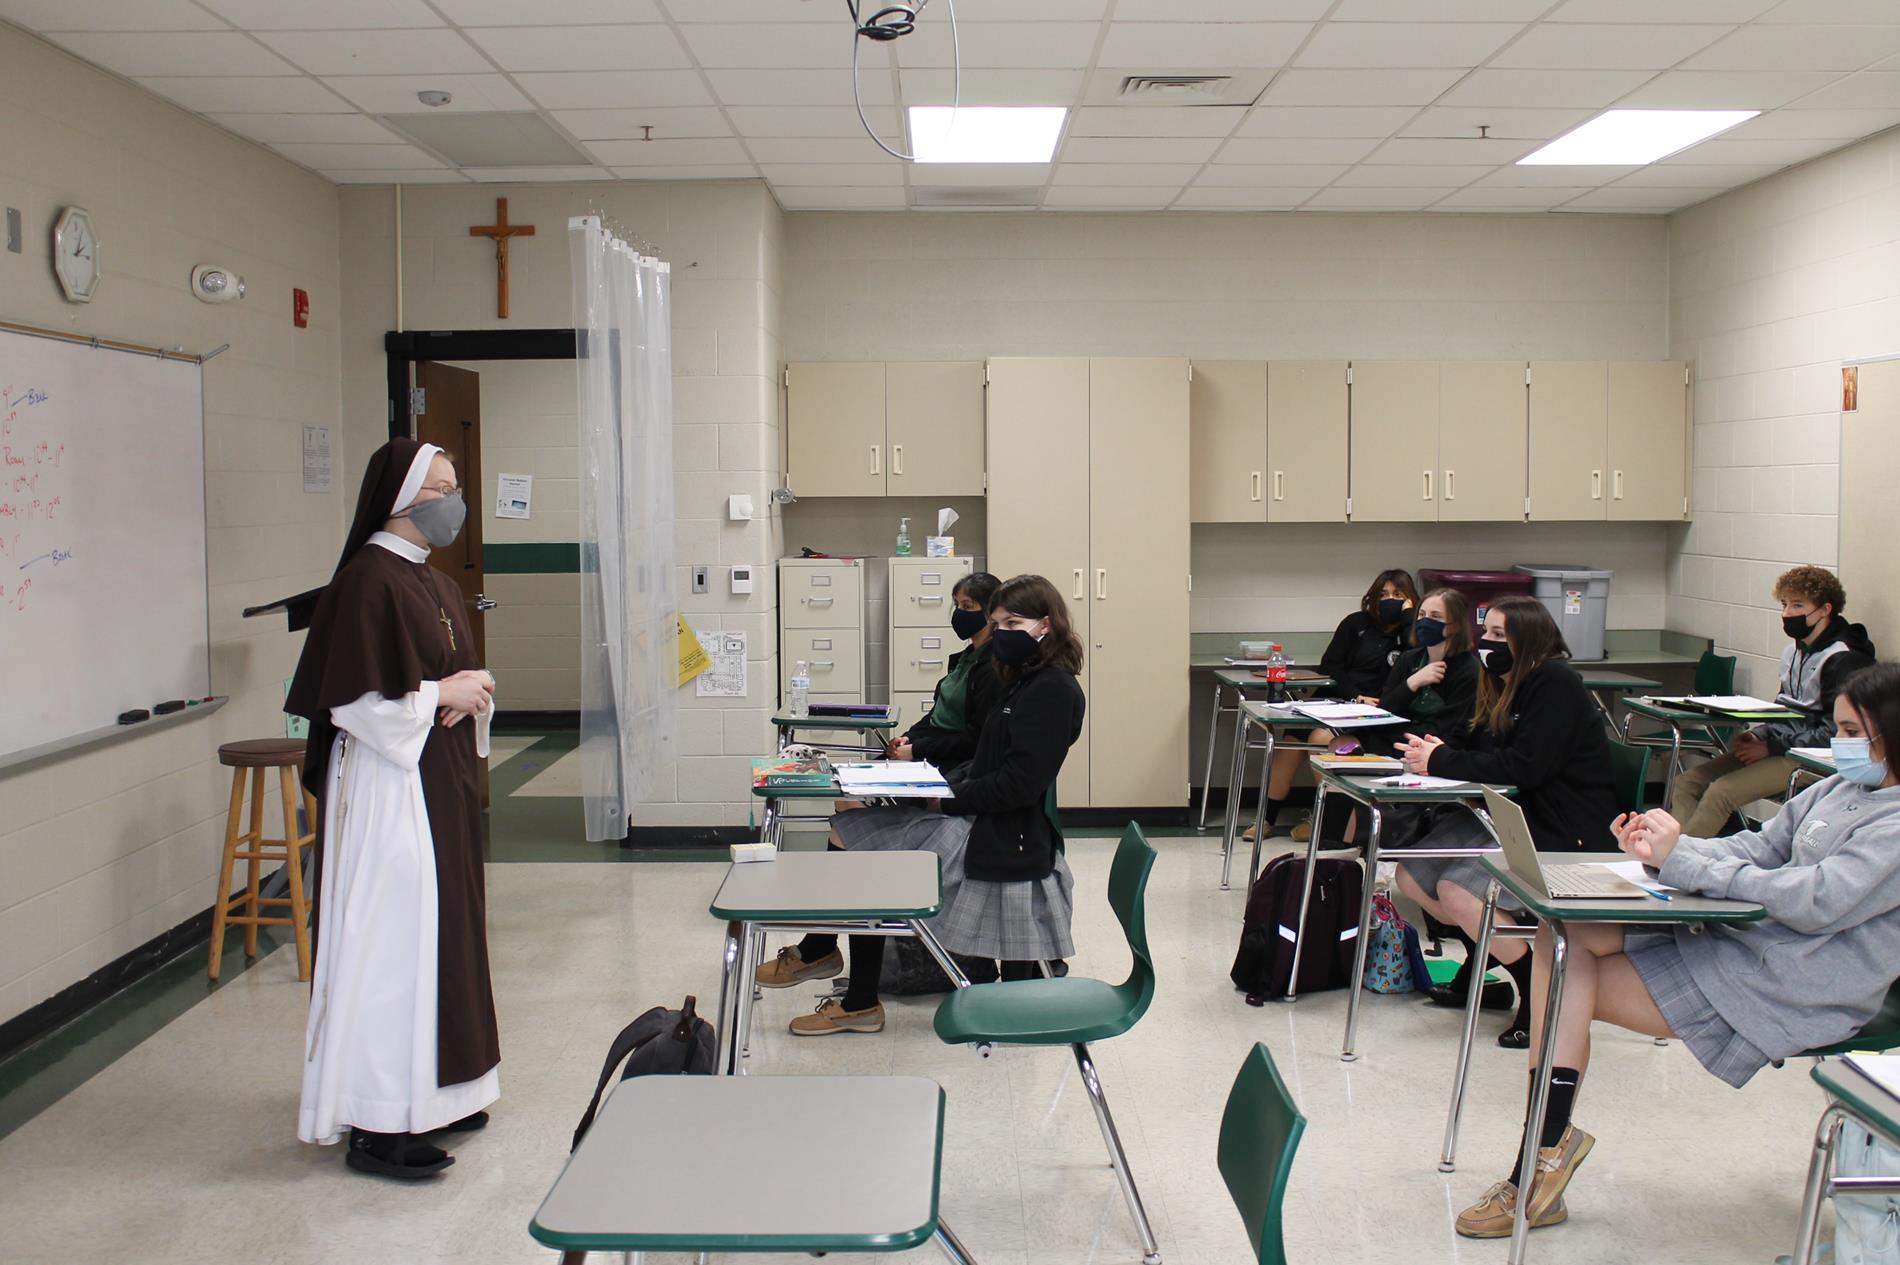 Sister Faustina speaking to a class